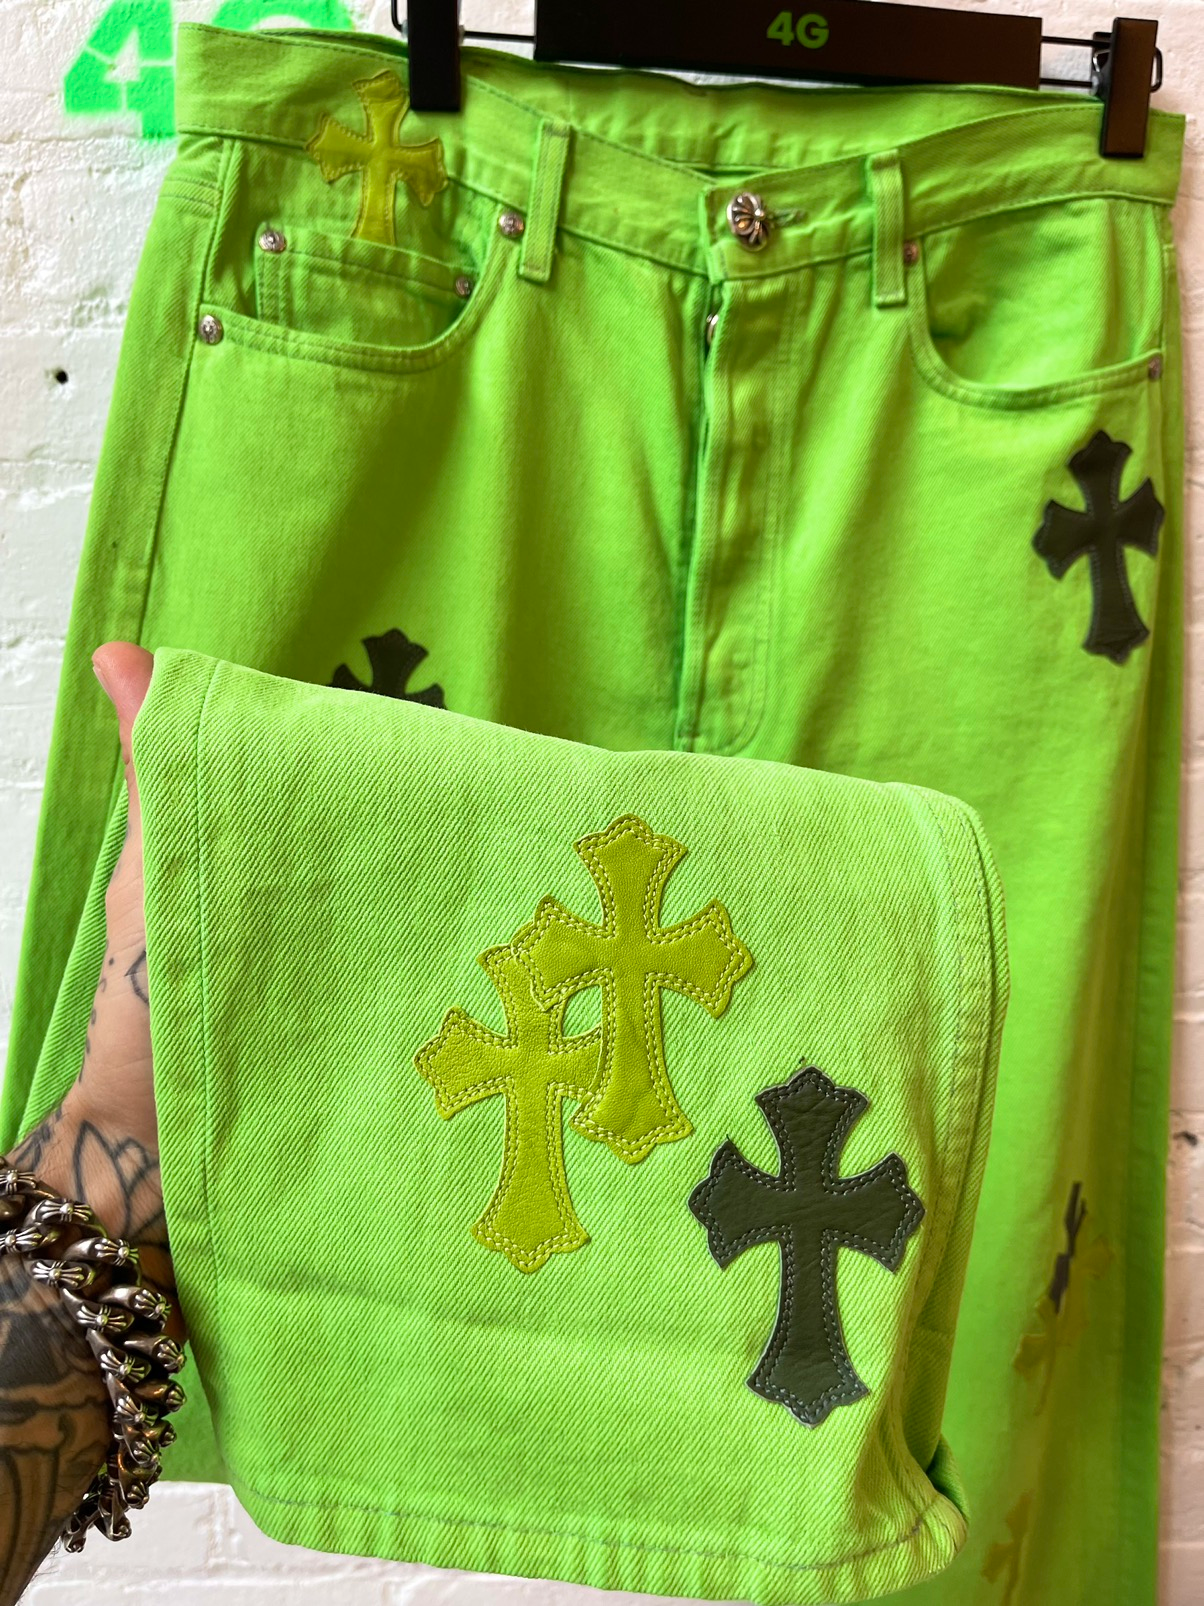 Chrome Hearts Levi Lime Green Cross Patch Jeans 31 fit 32